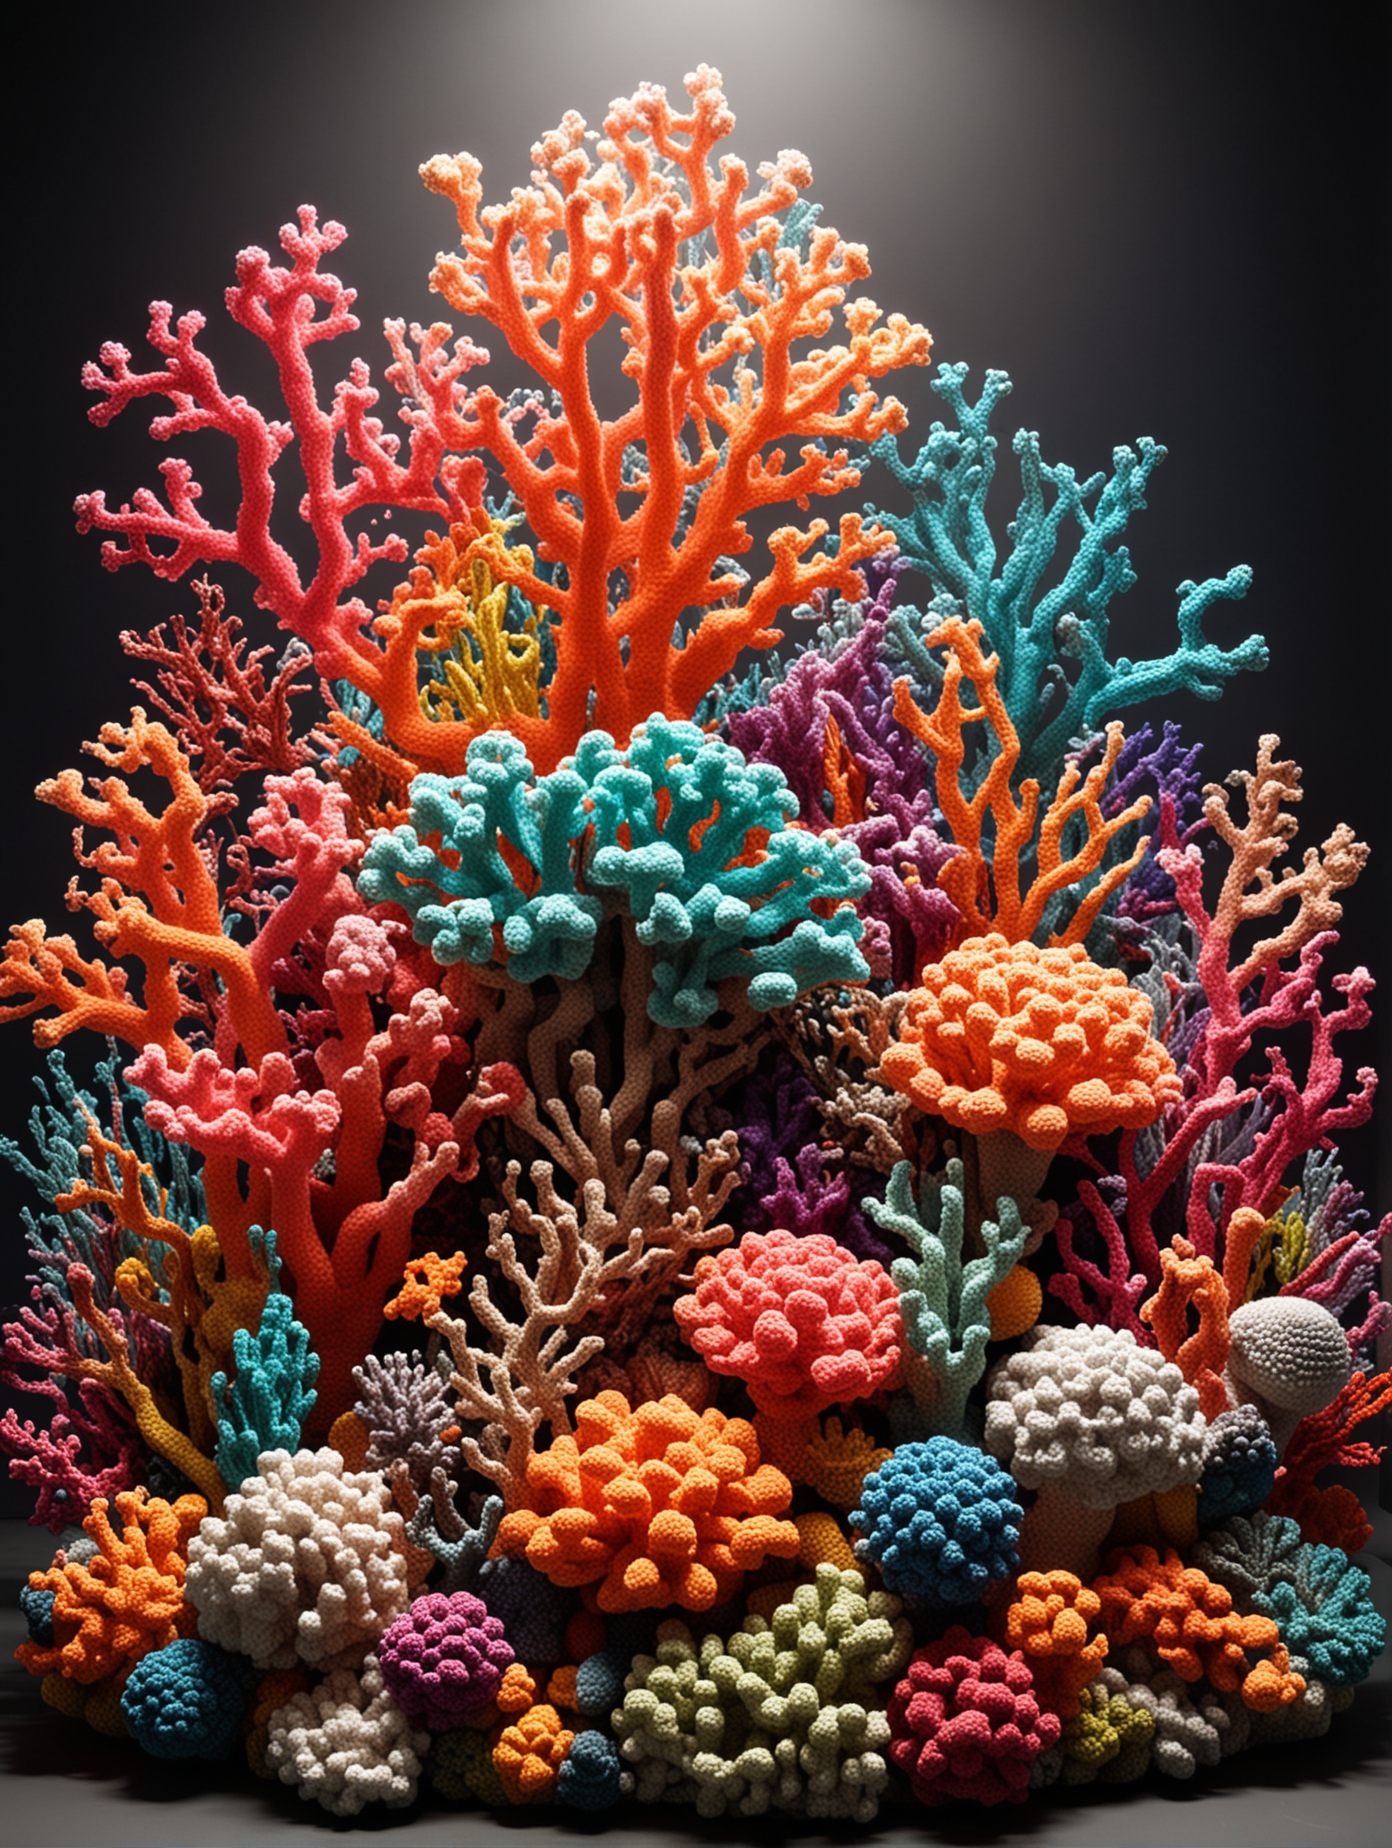 Crocheted coral reef, one light source, crazy colors